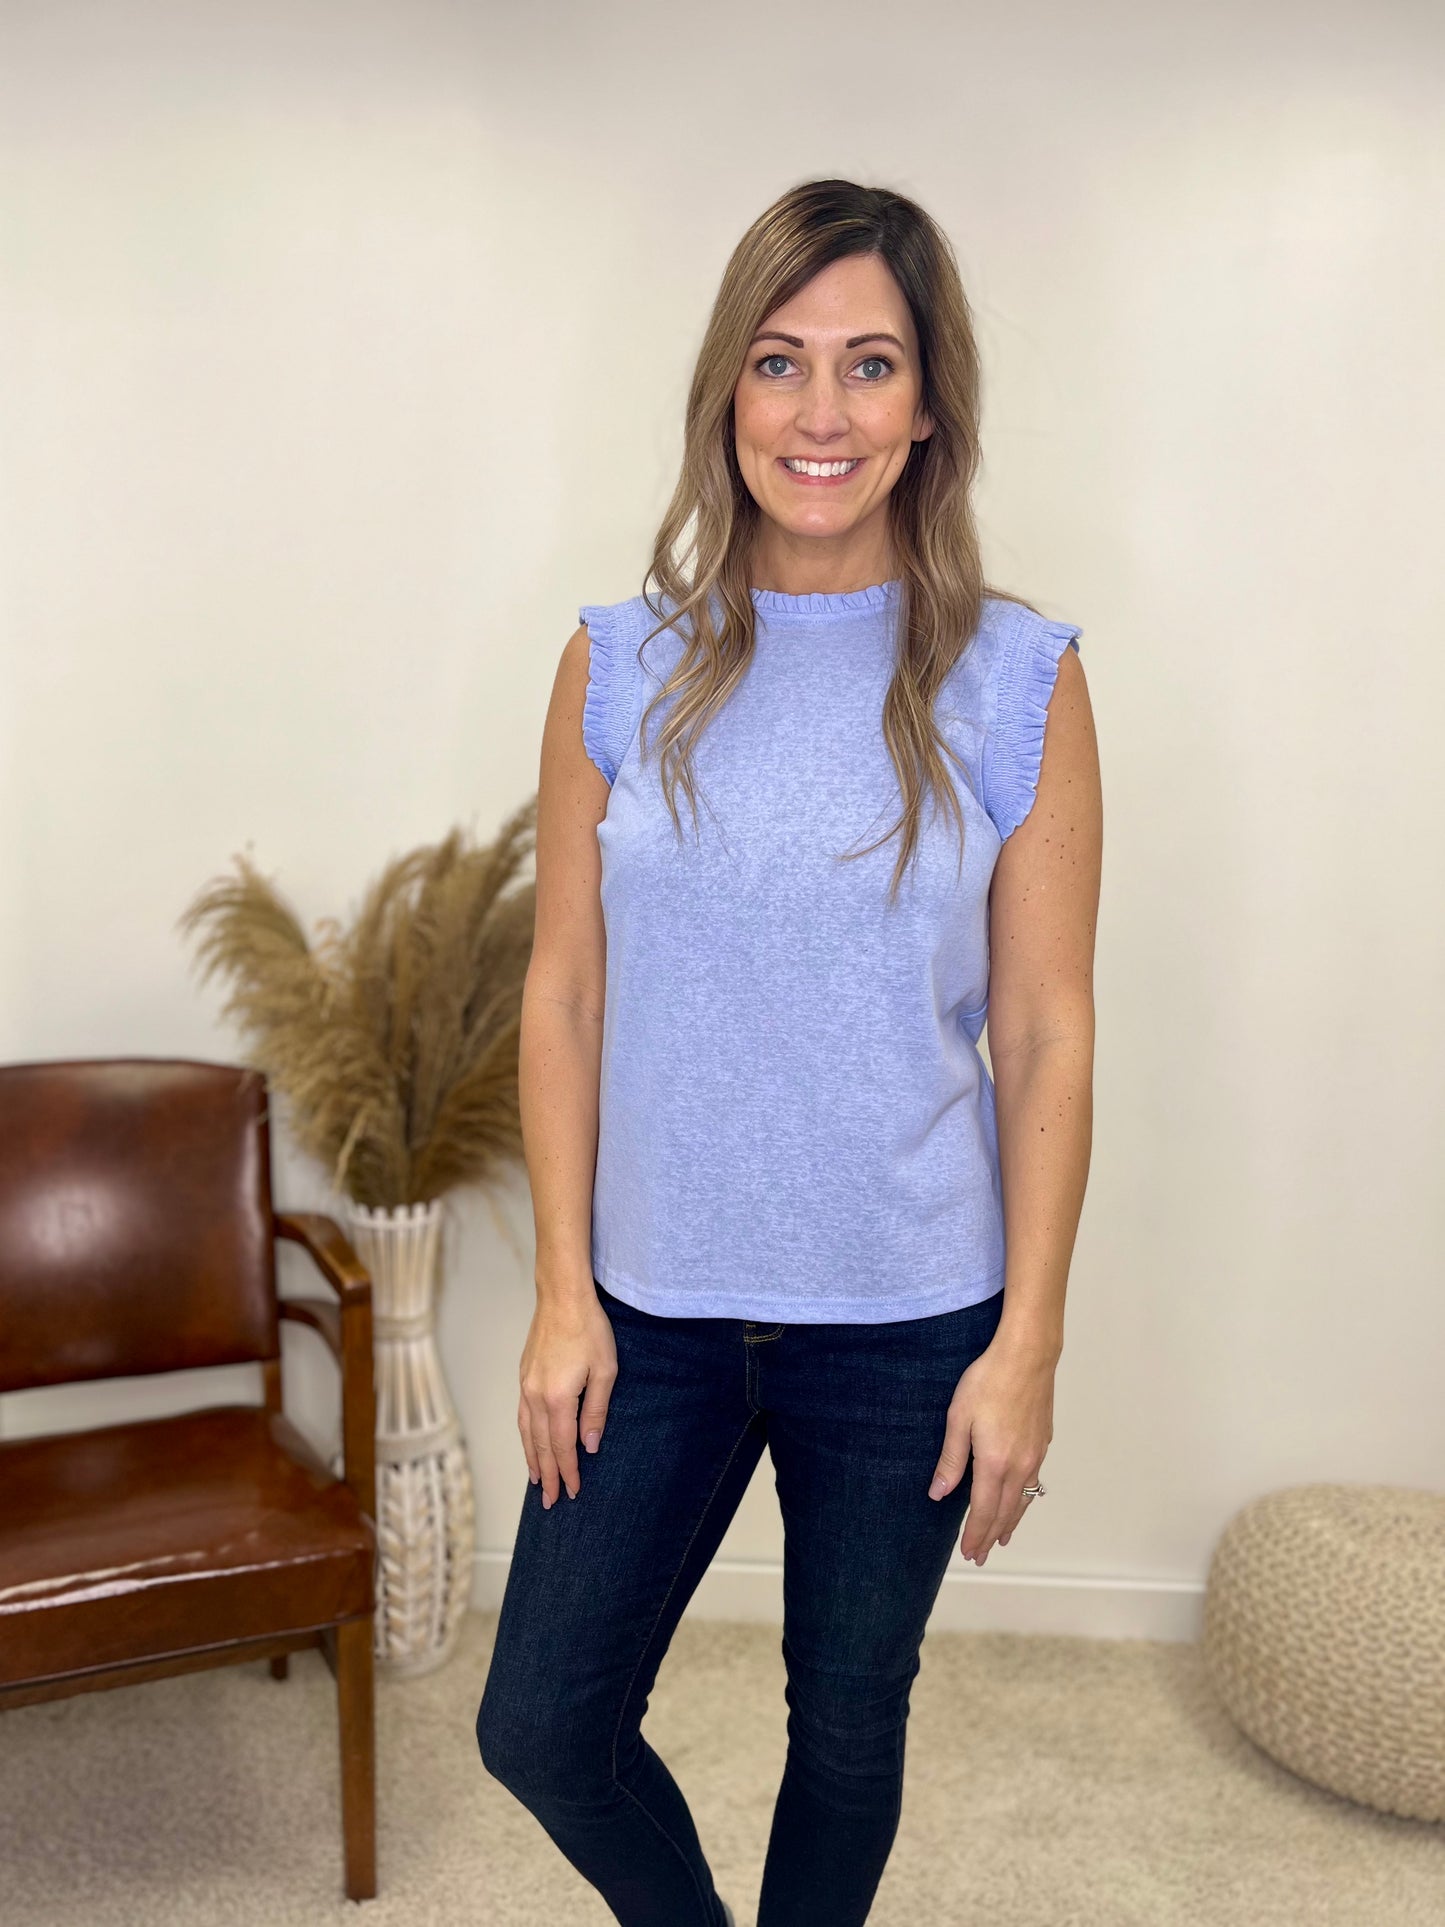 The Brayleigh Spring Blue Top